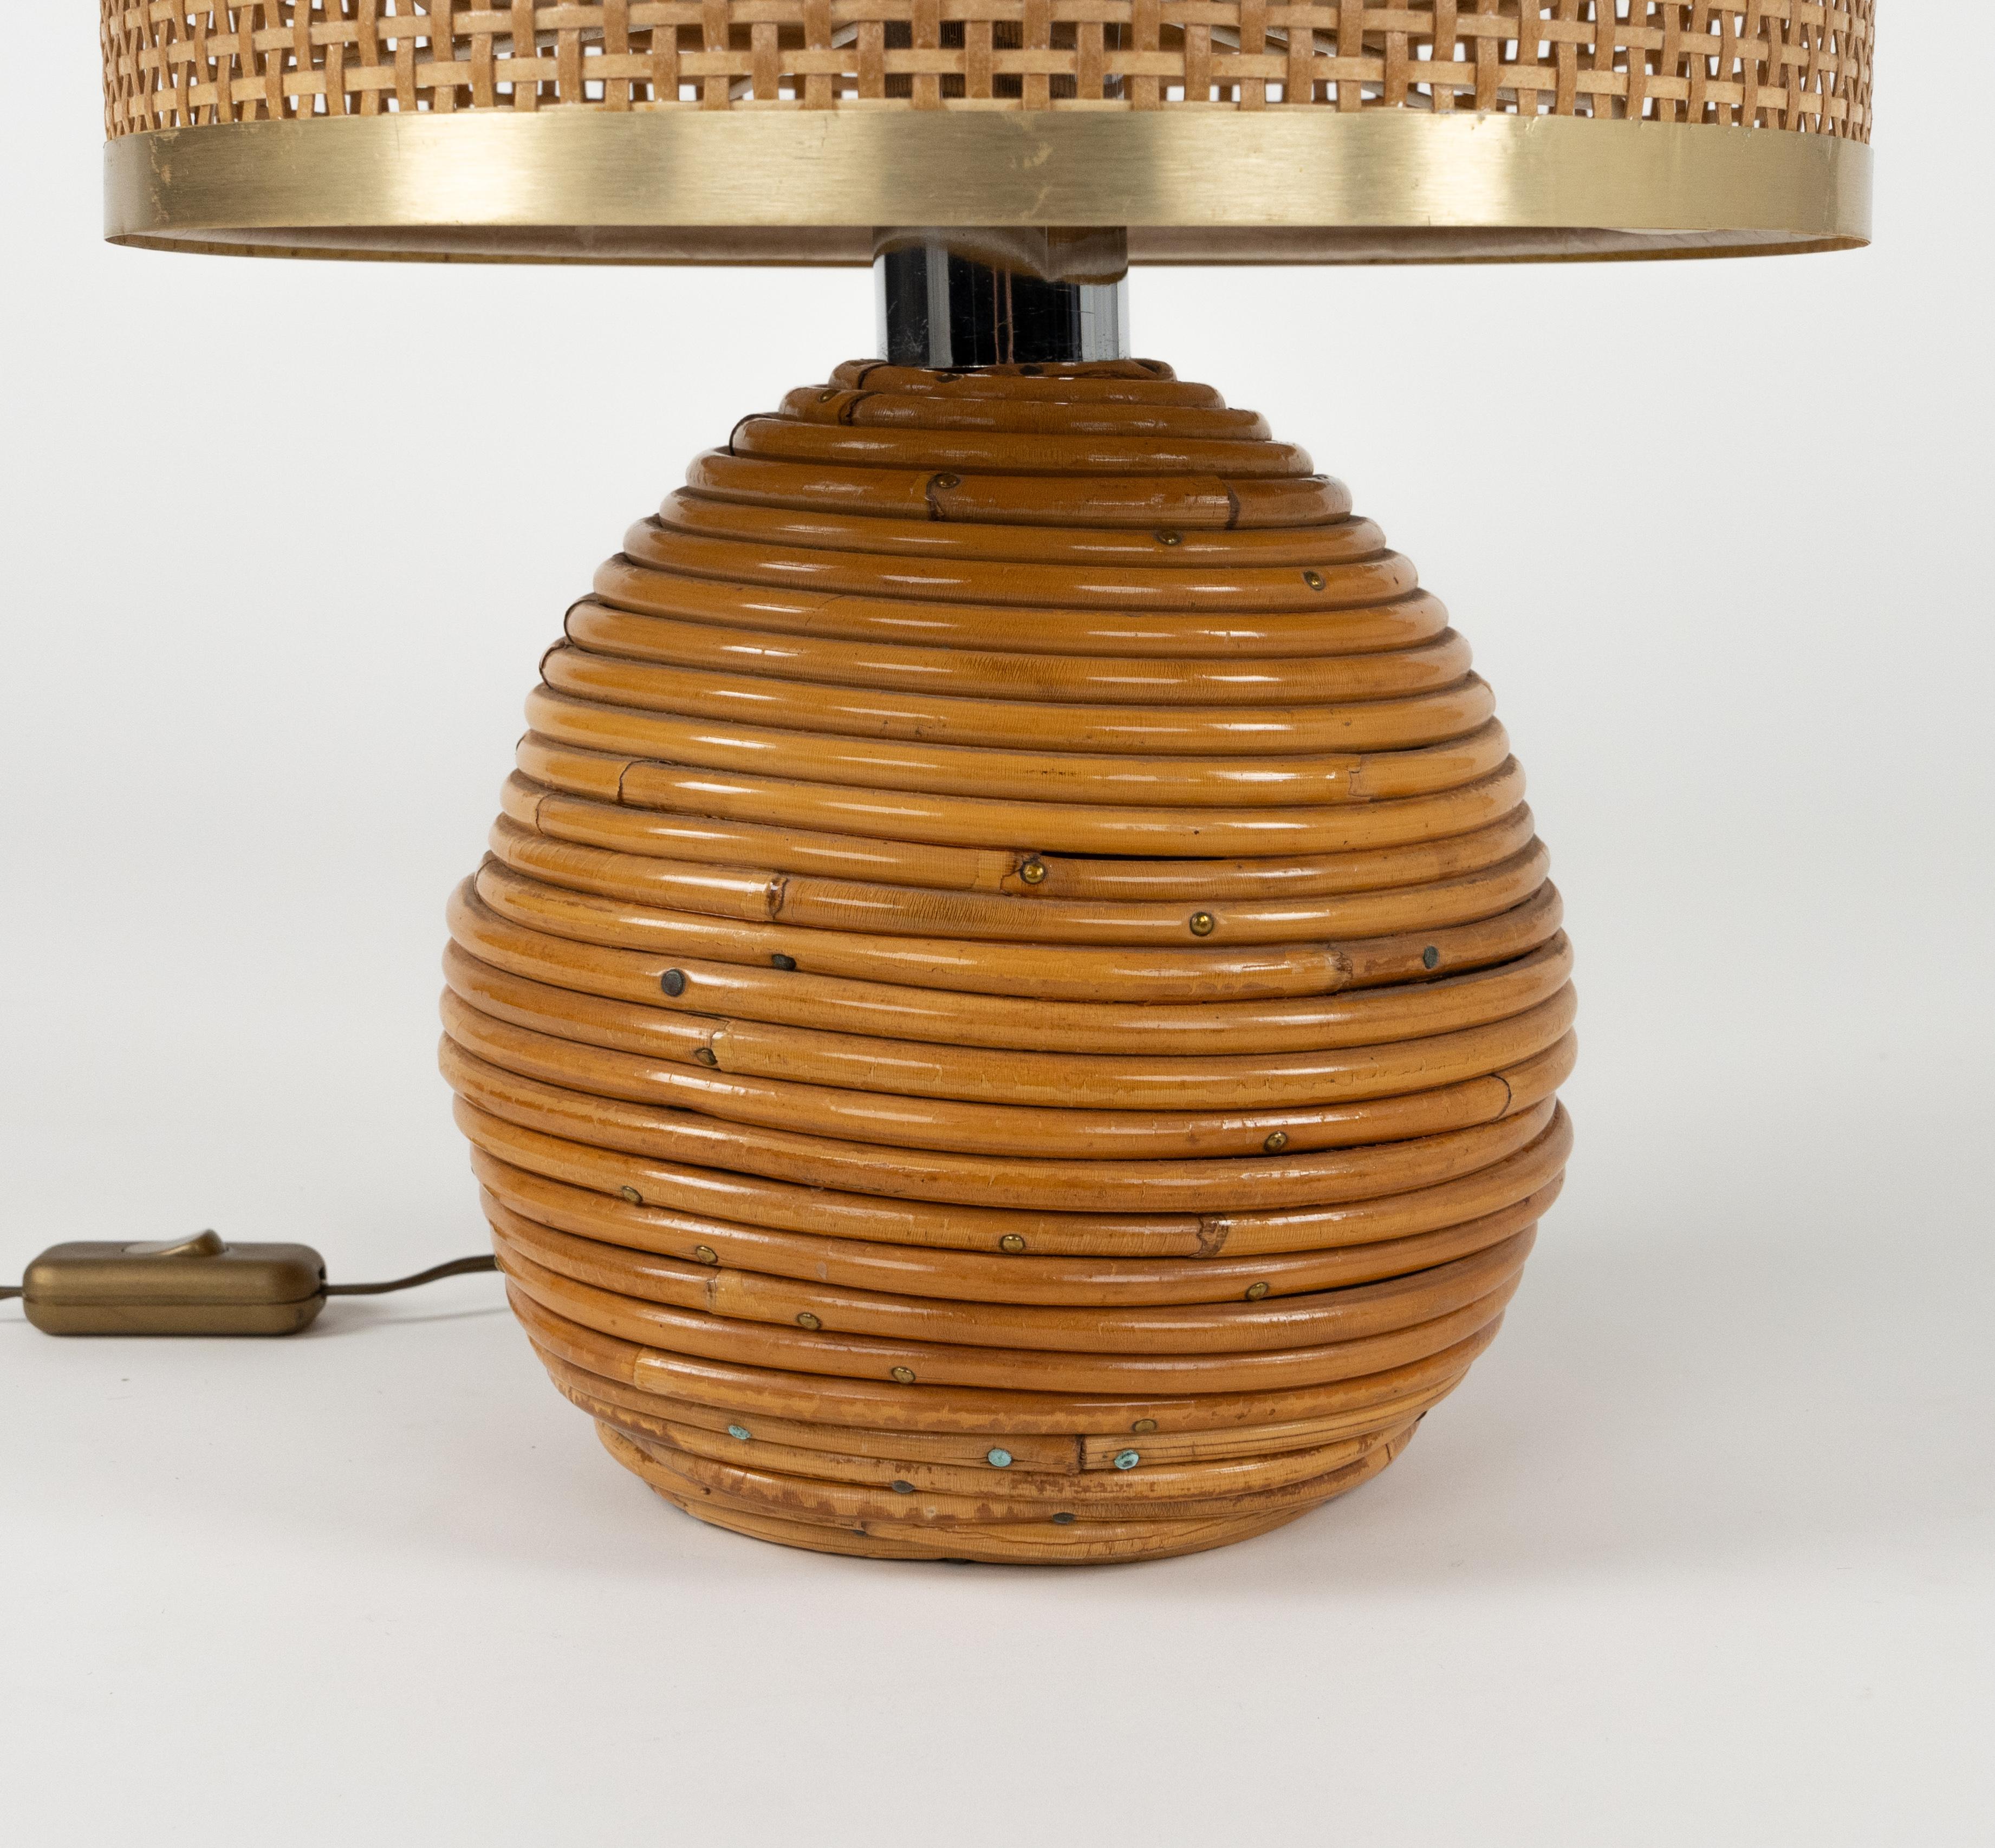 Late 20th Century Midcentury Rattan, Wicker and Chrome Table Lamp by Vivai Del Sud, Italy 1970s For Sale